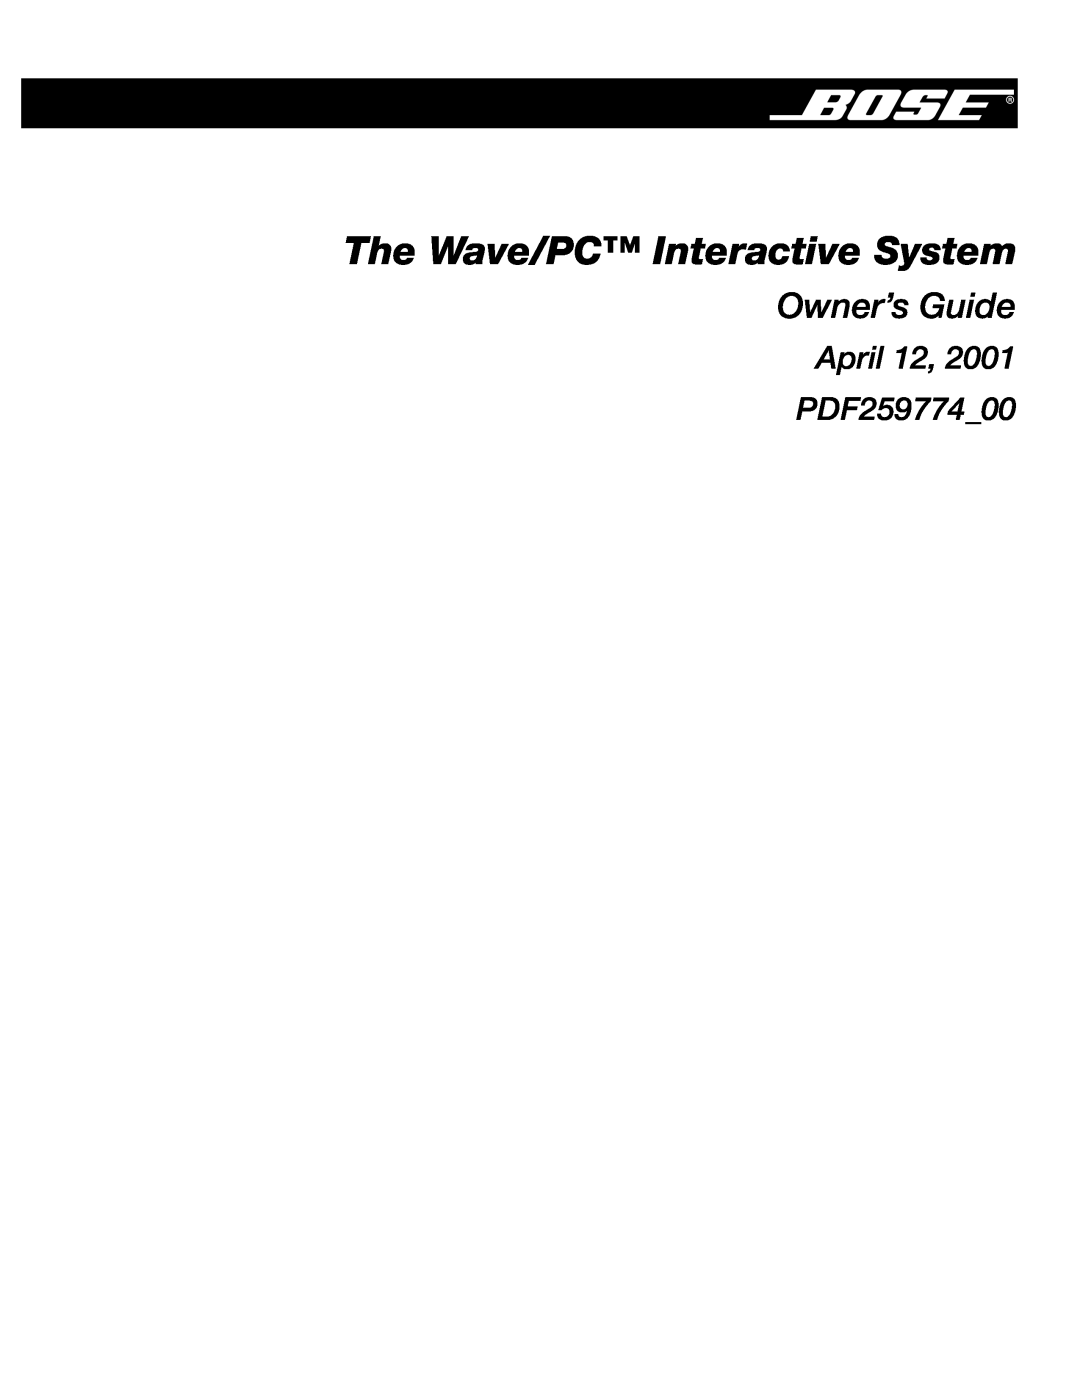 Bose PDF259774_00 manual The Wave/PC Interactive System, Owner’s Guide, April 12 PDF25977400 